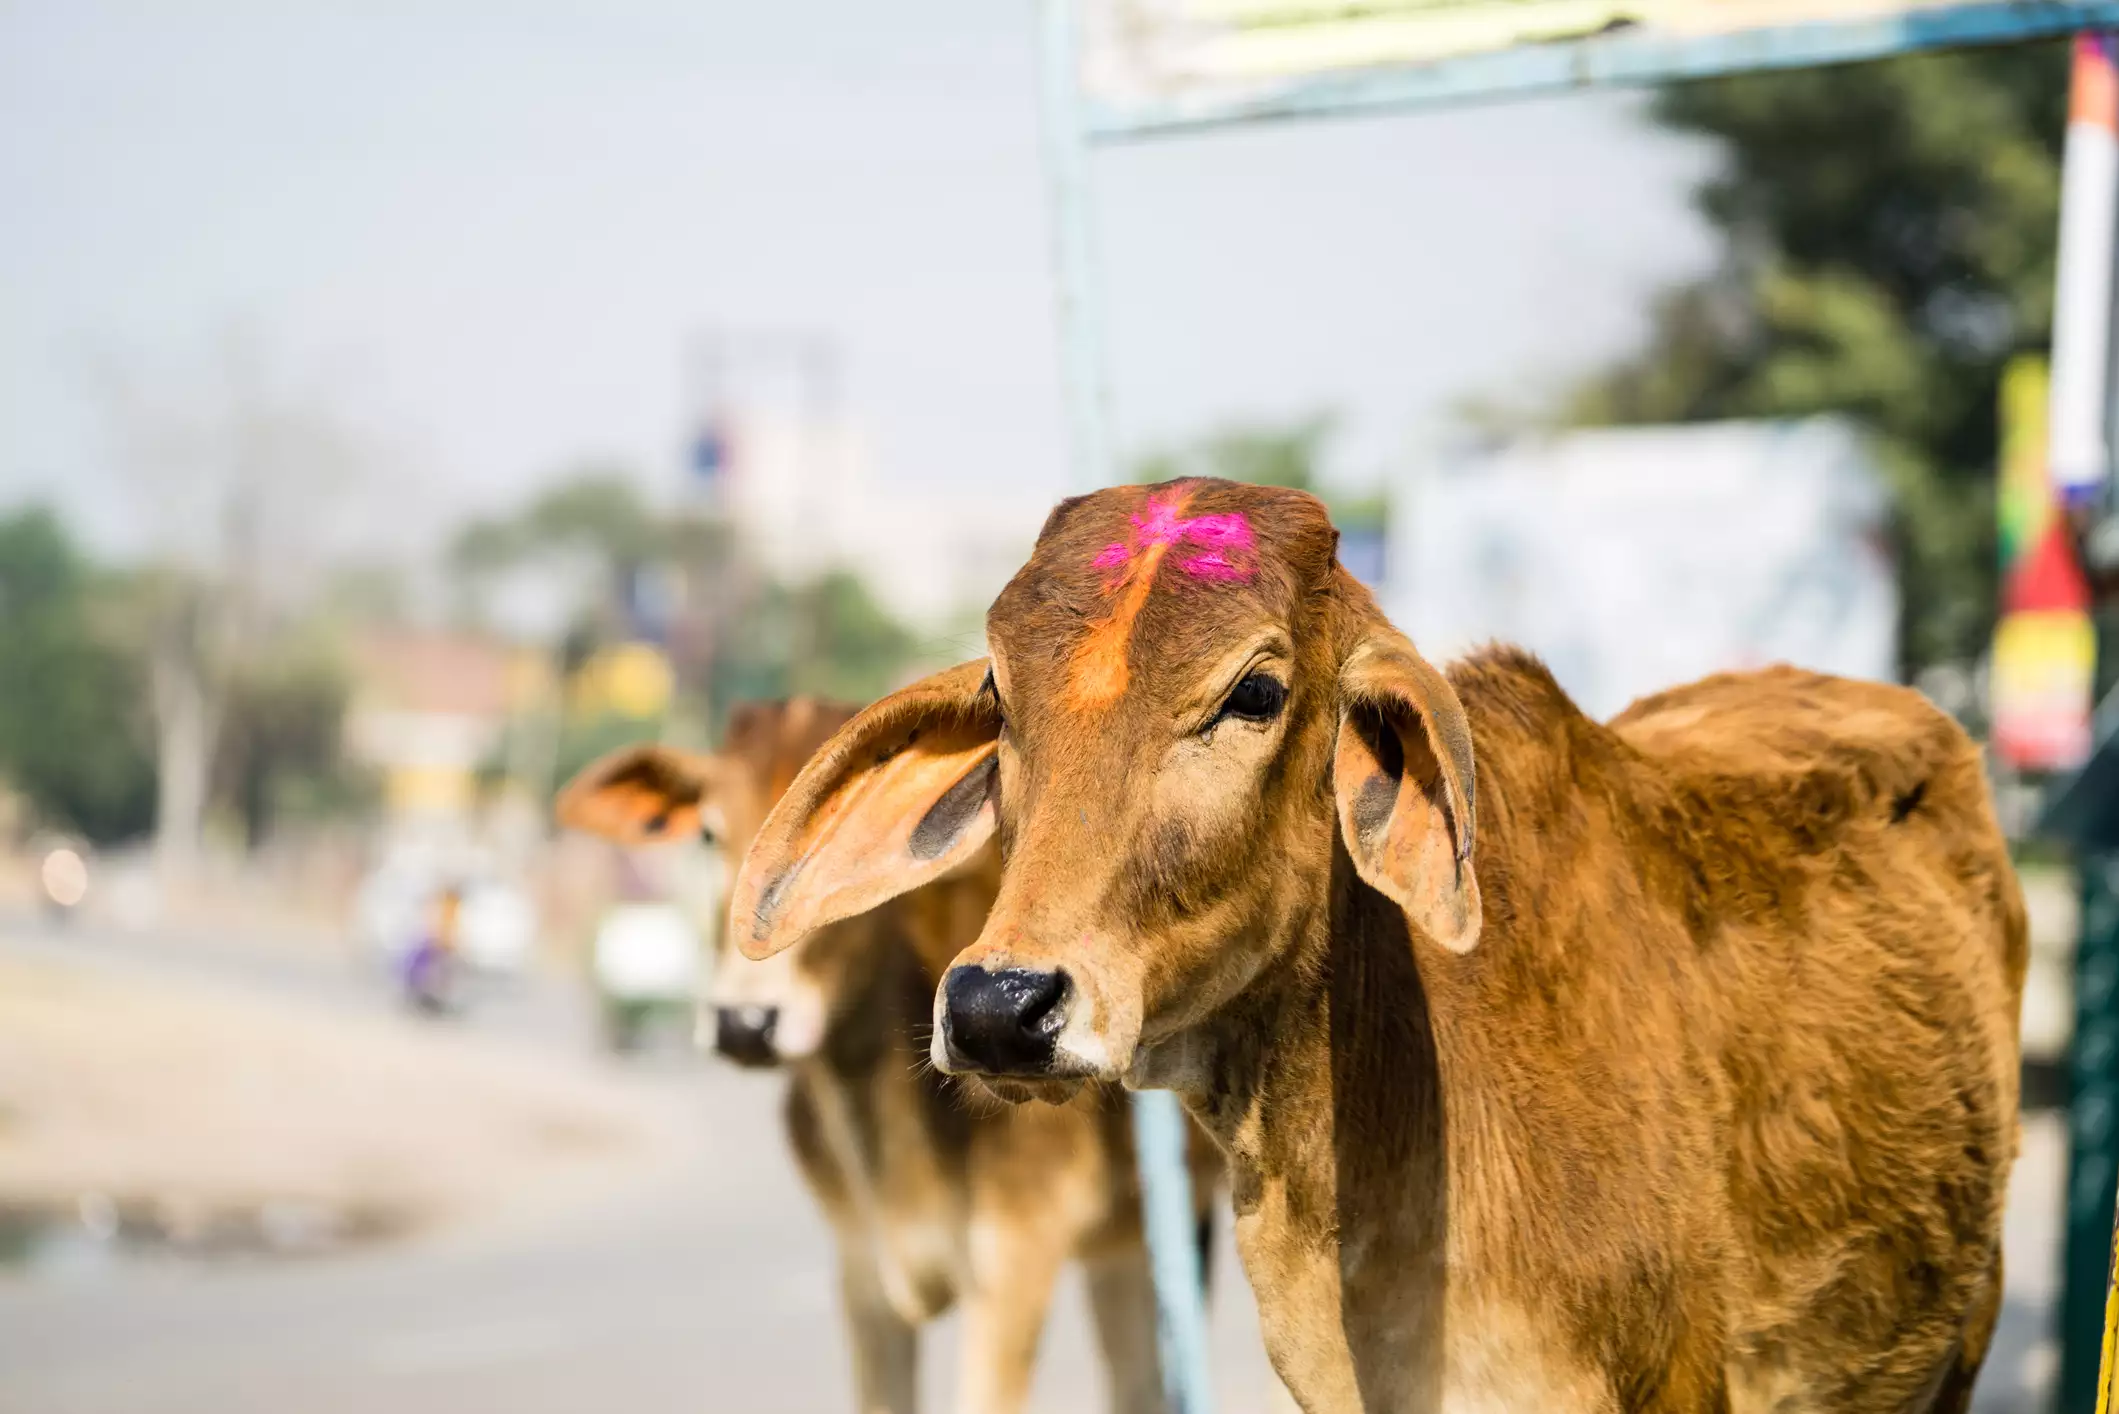 A cow on the street with a dab of pink paint on its forehead